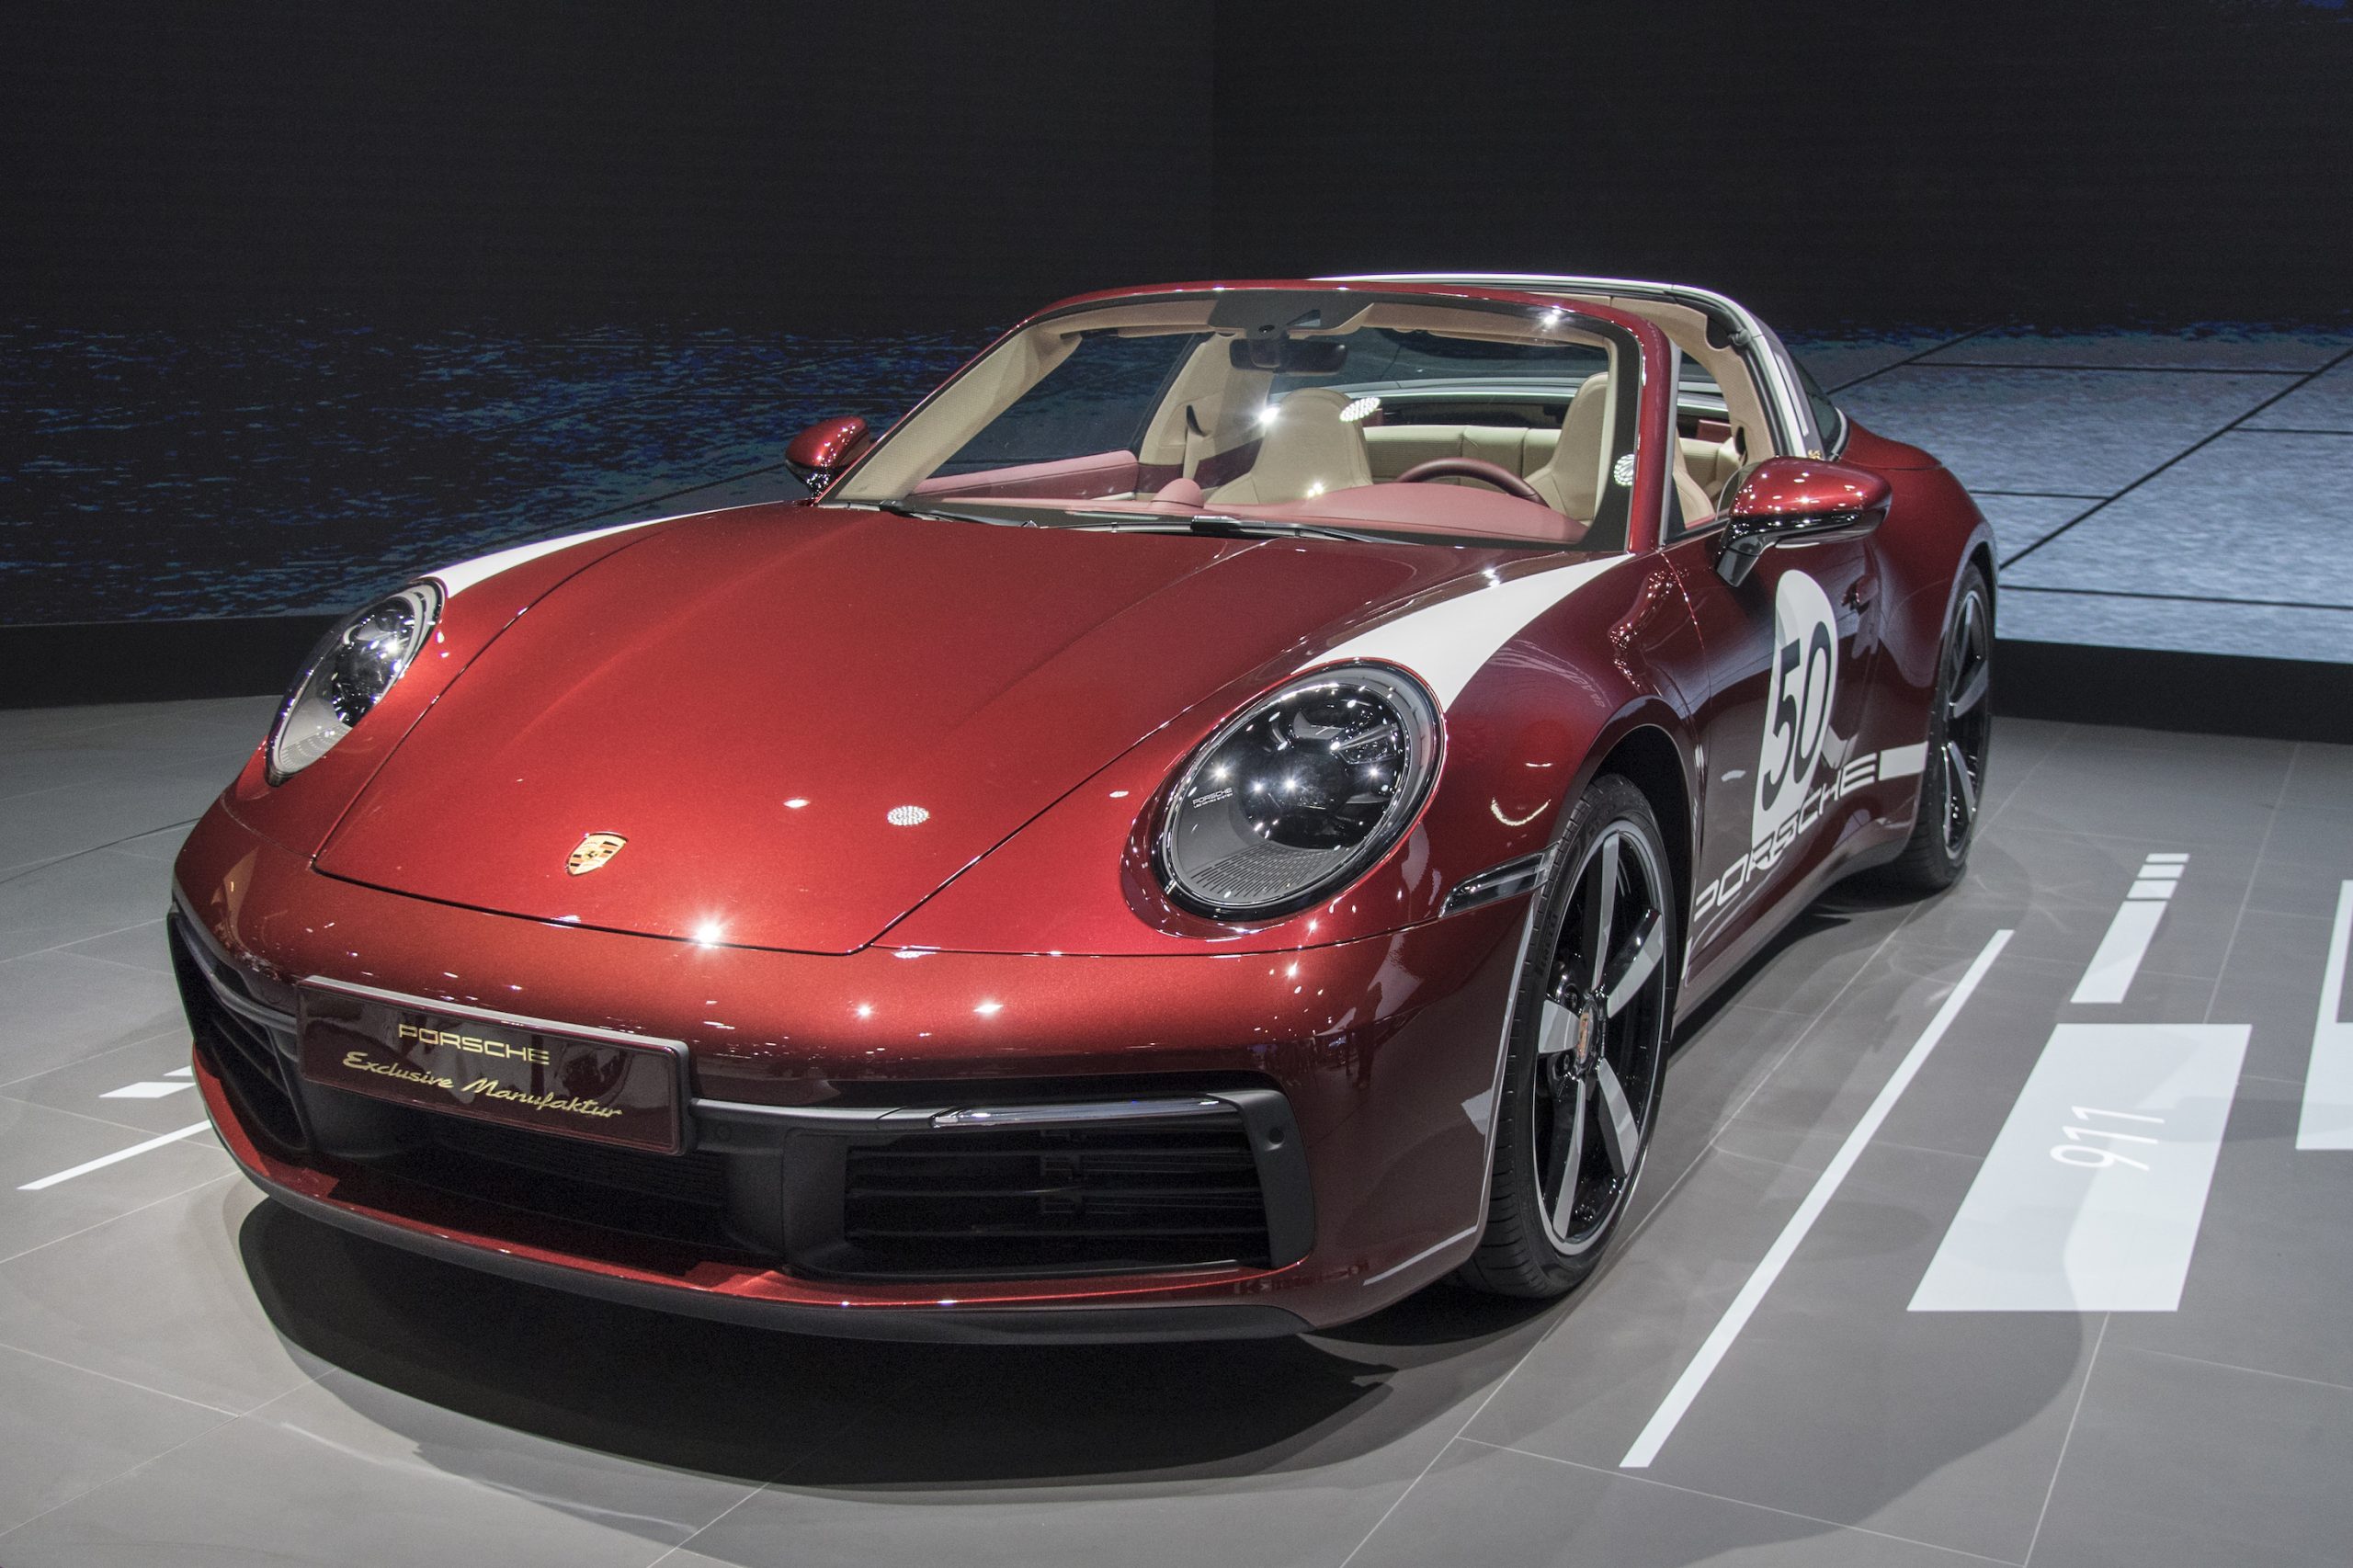 A Porsche 911 Targa 4S vehicle is on display during the 18th Guangzhou International Automobile Exhibition